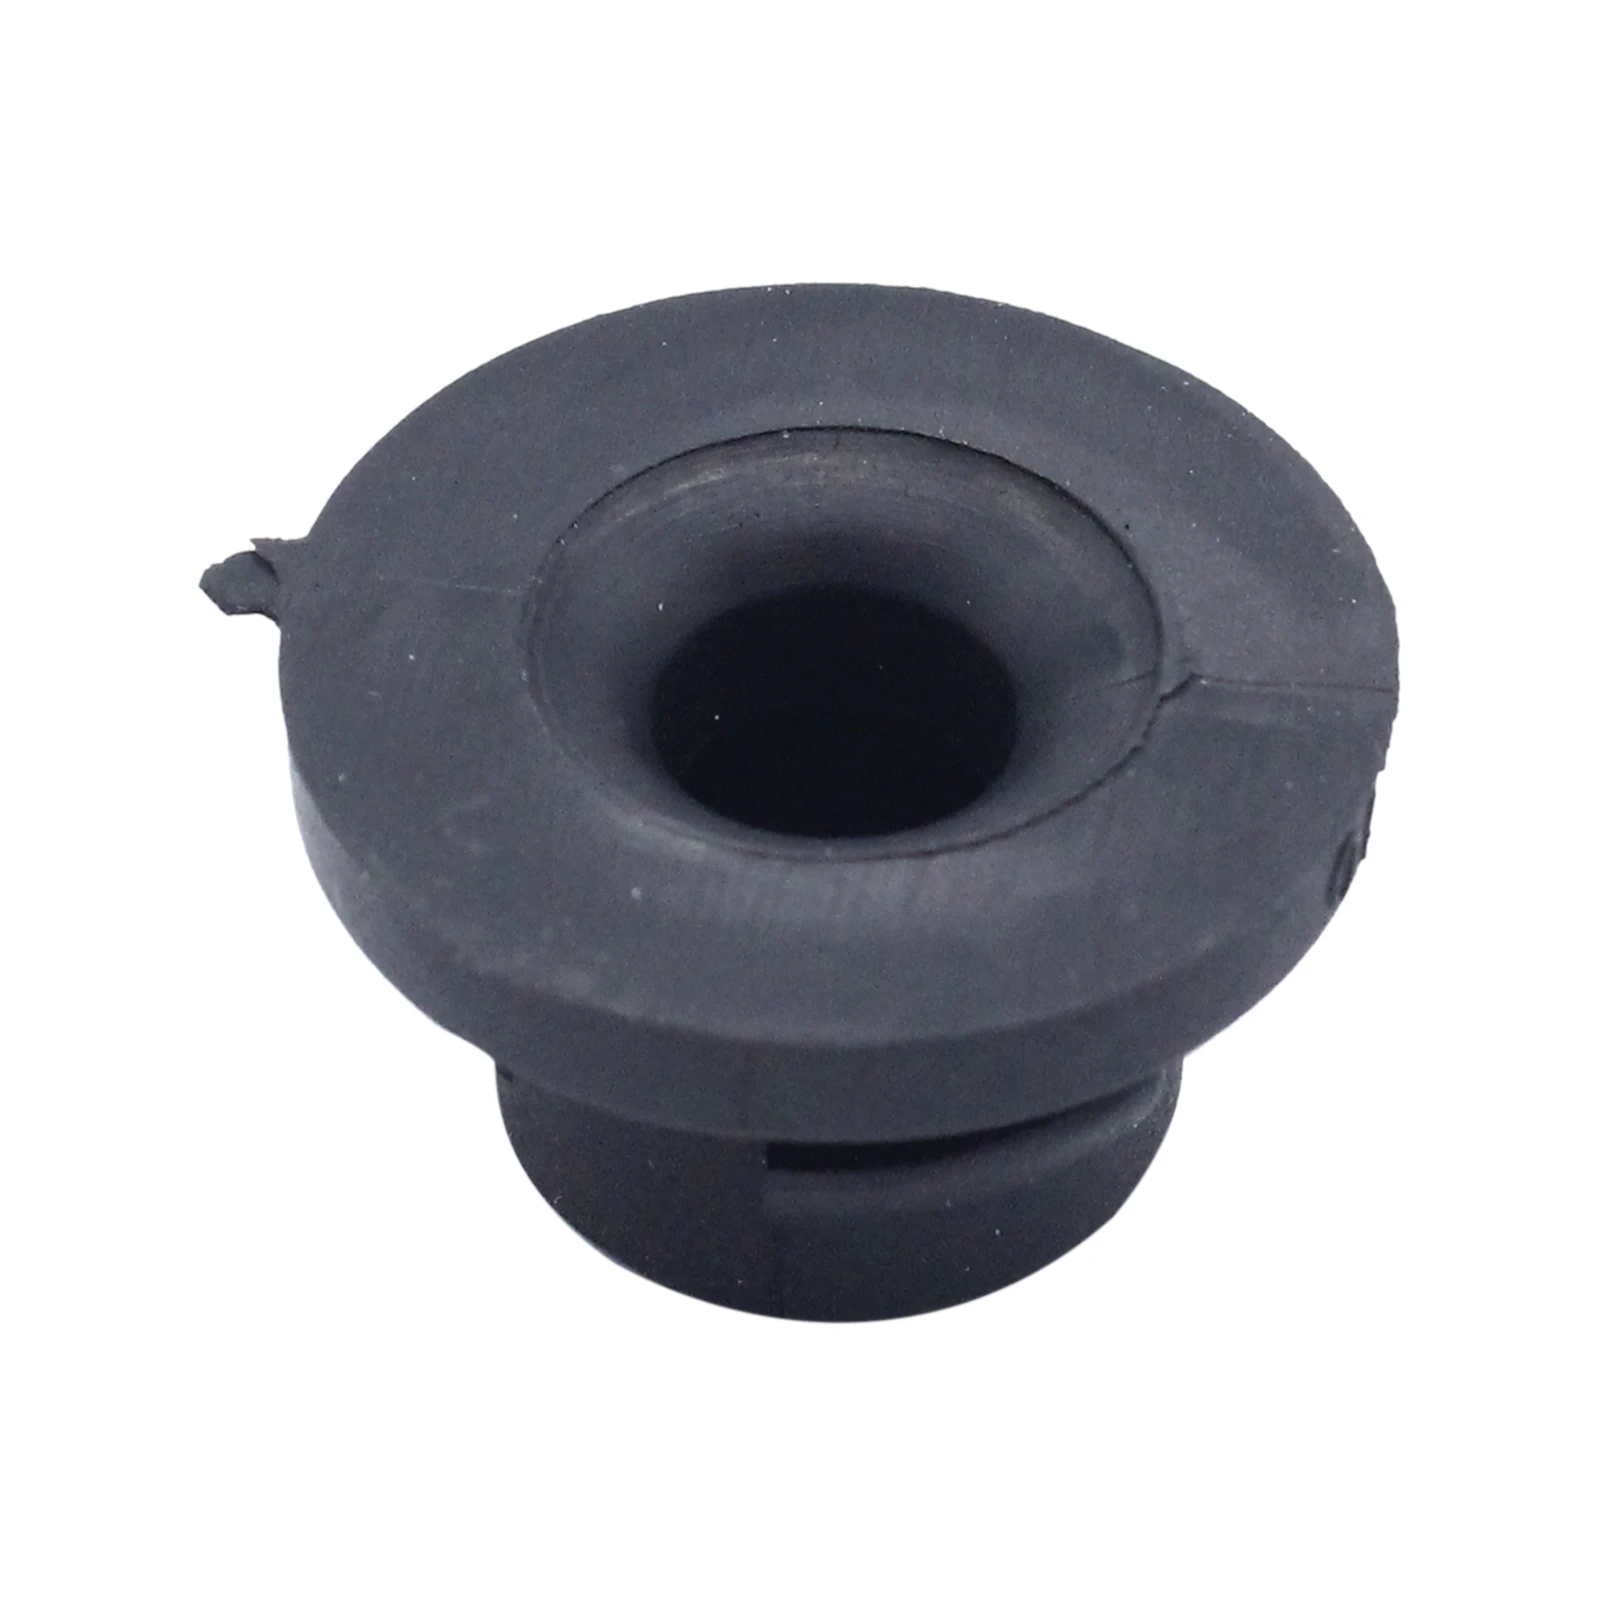 Car Air Filter Plugs Rubber Insert Grommet for Citroen Peugeot 1.6 Plug Dust Filter Rubber Air Filter Ring Plug